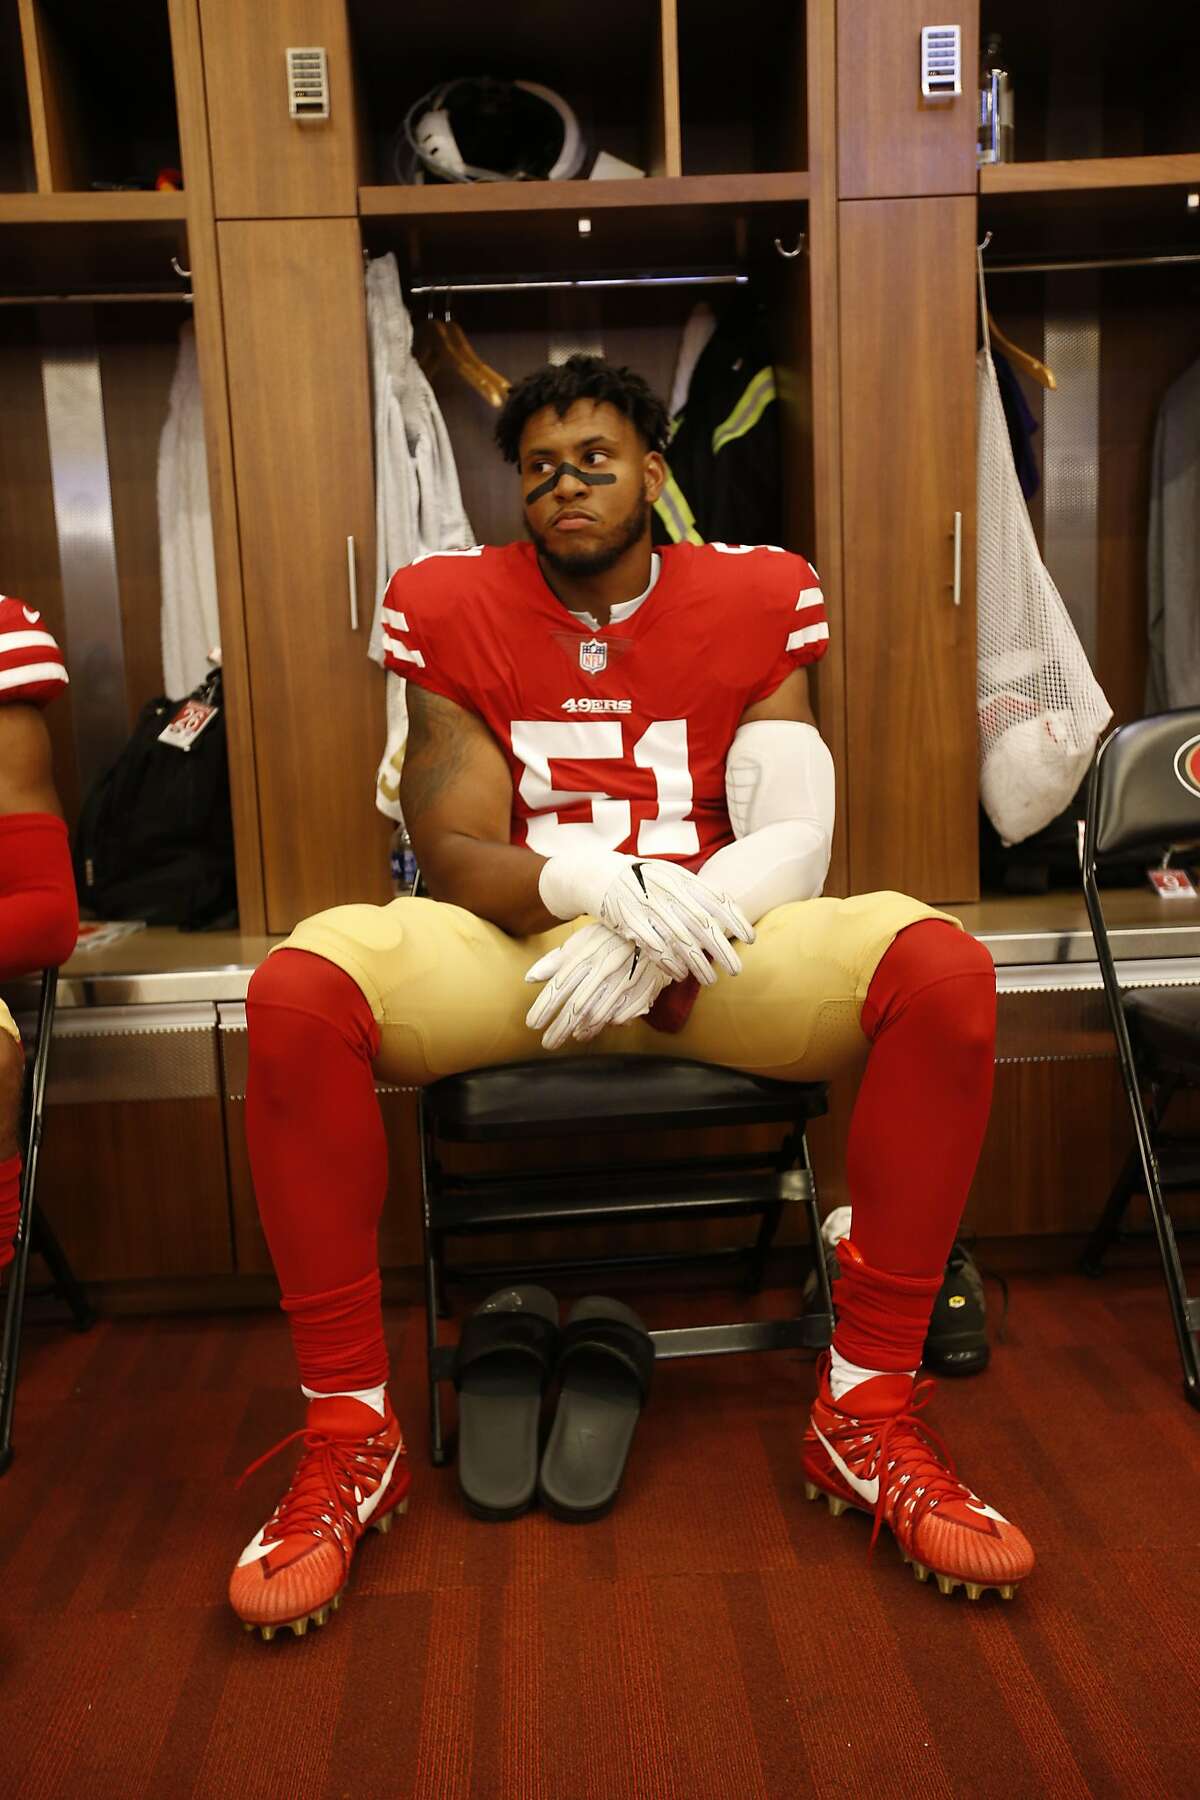 SANTA CLARA, CA - AUGUST 9: Malcolm Smith #51 of the San Francisco 49ers sits in the locker room prior to the game against the Dallas Cowboys at Levi Stadium on August 9, 2018 in Santa Clara, California. The 49ers defeated the Cowboys 24-21. ~~